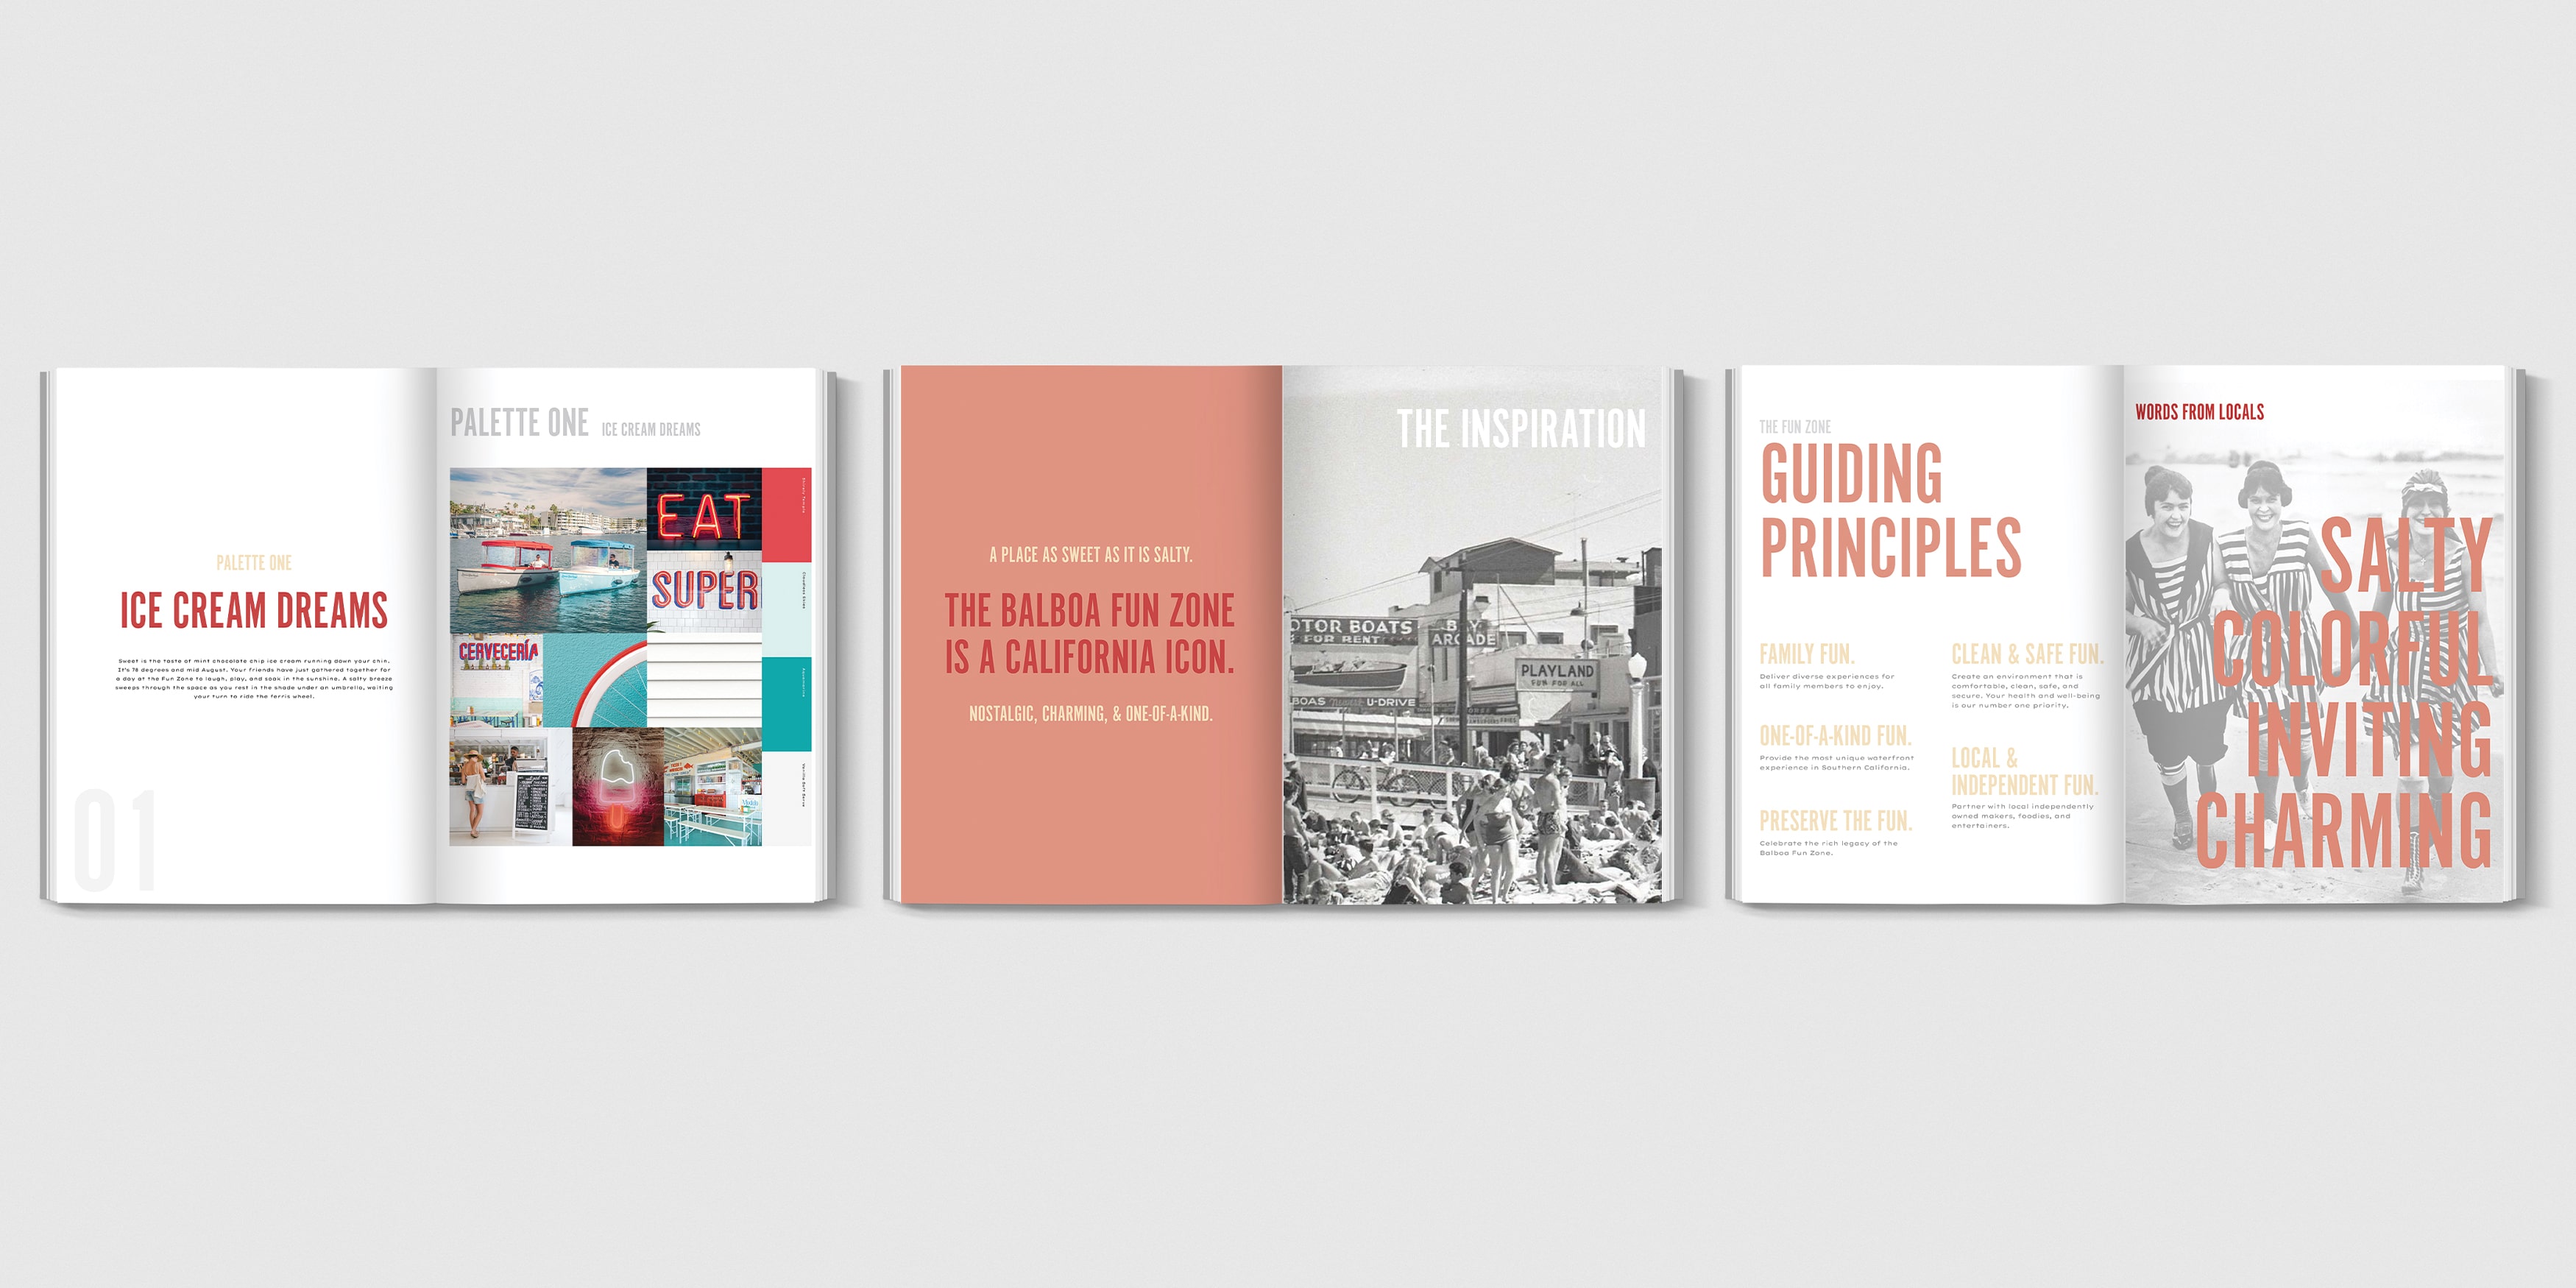 Flatlay of three books that have spreads open to the color palette, the inspiration, and the guiding principles of the Balboa Fun Zone in Newport Beach, California.